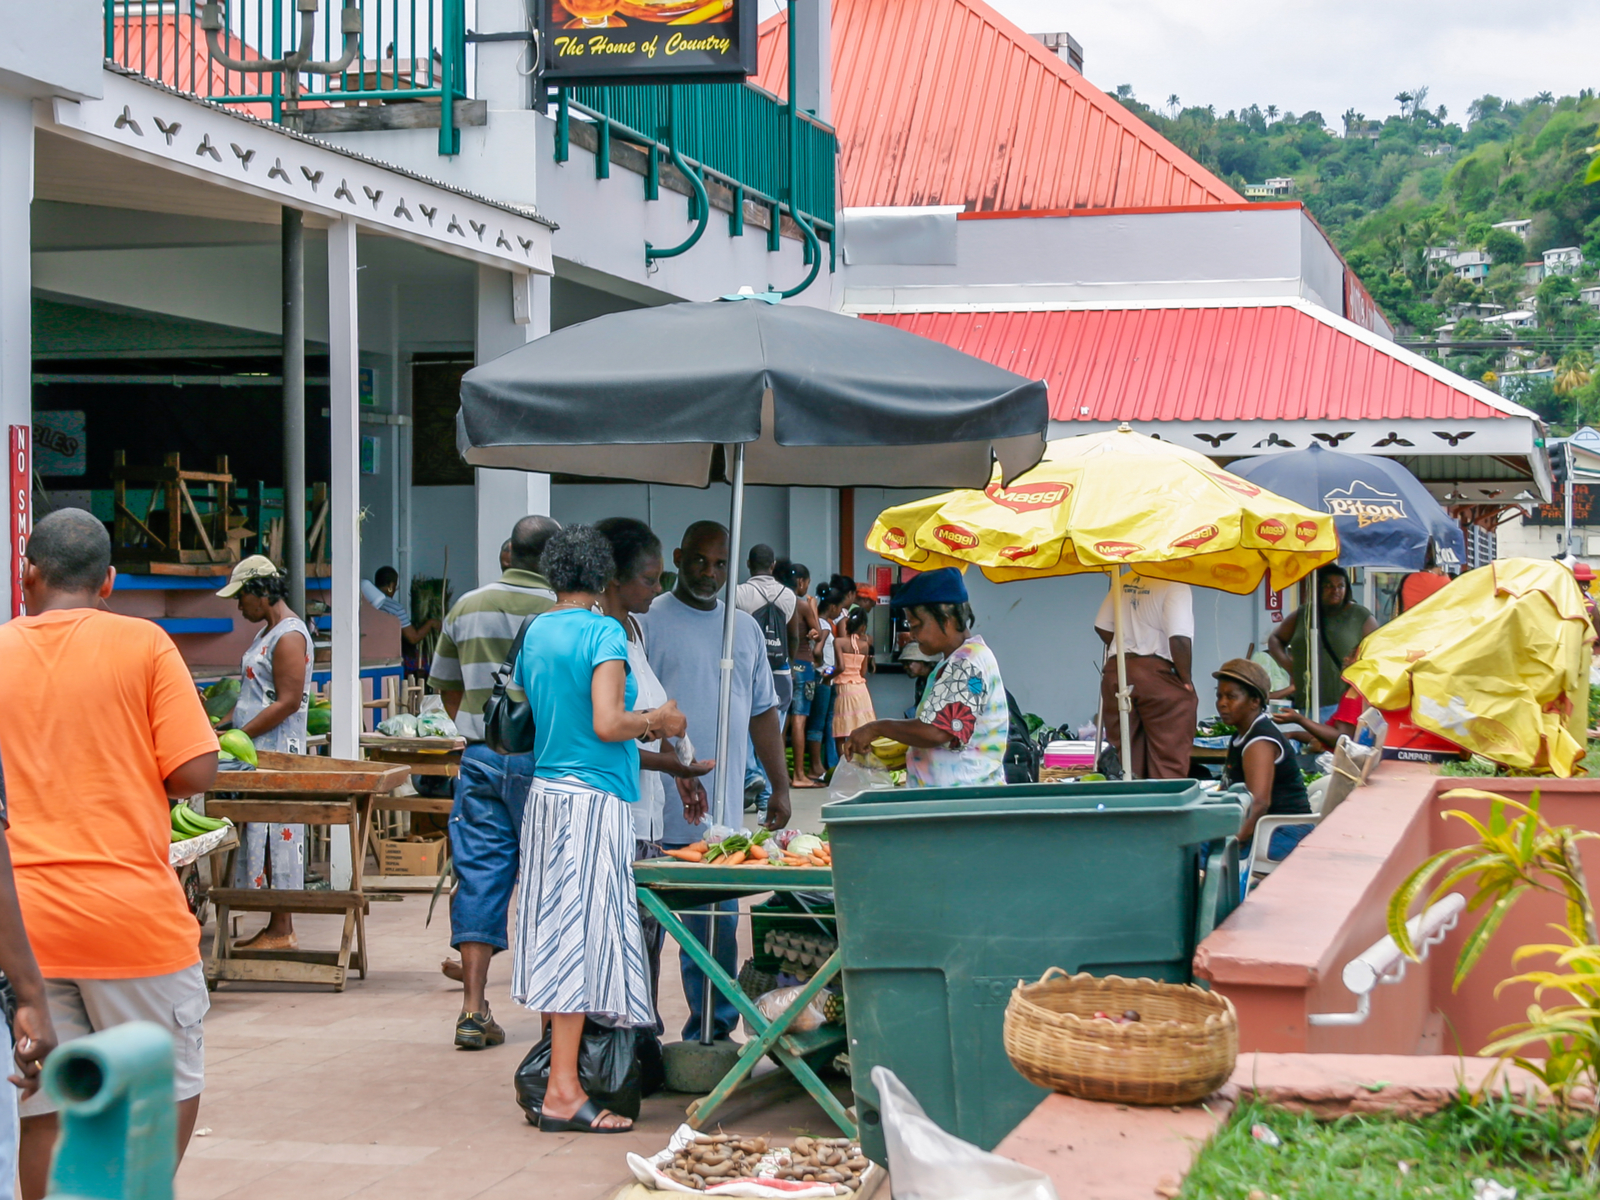 Shopping market, one of the best things to do in Saint Lucia